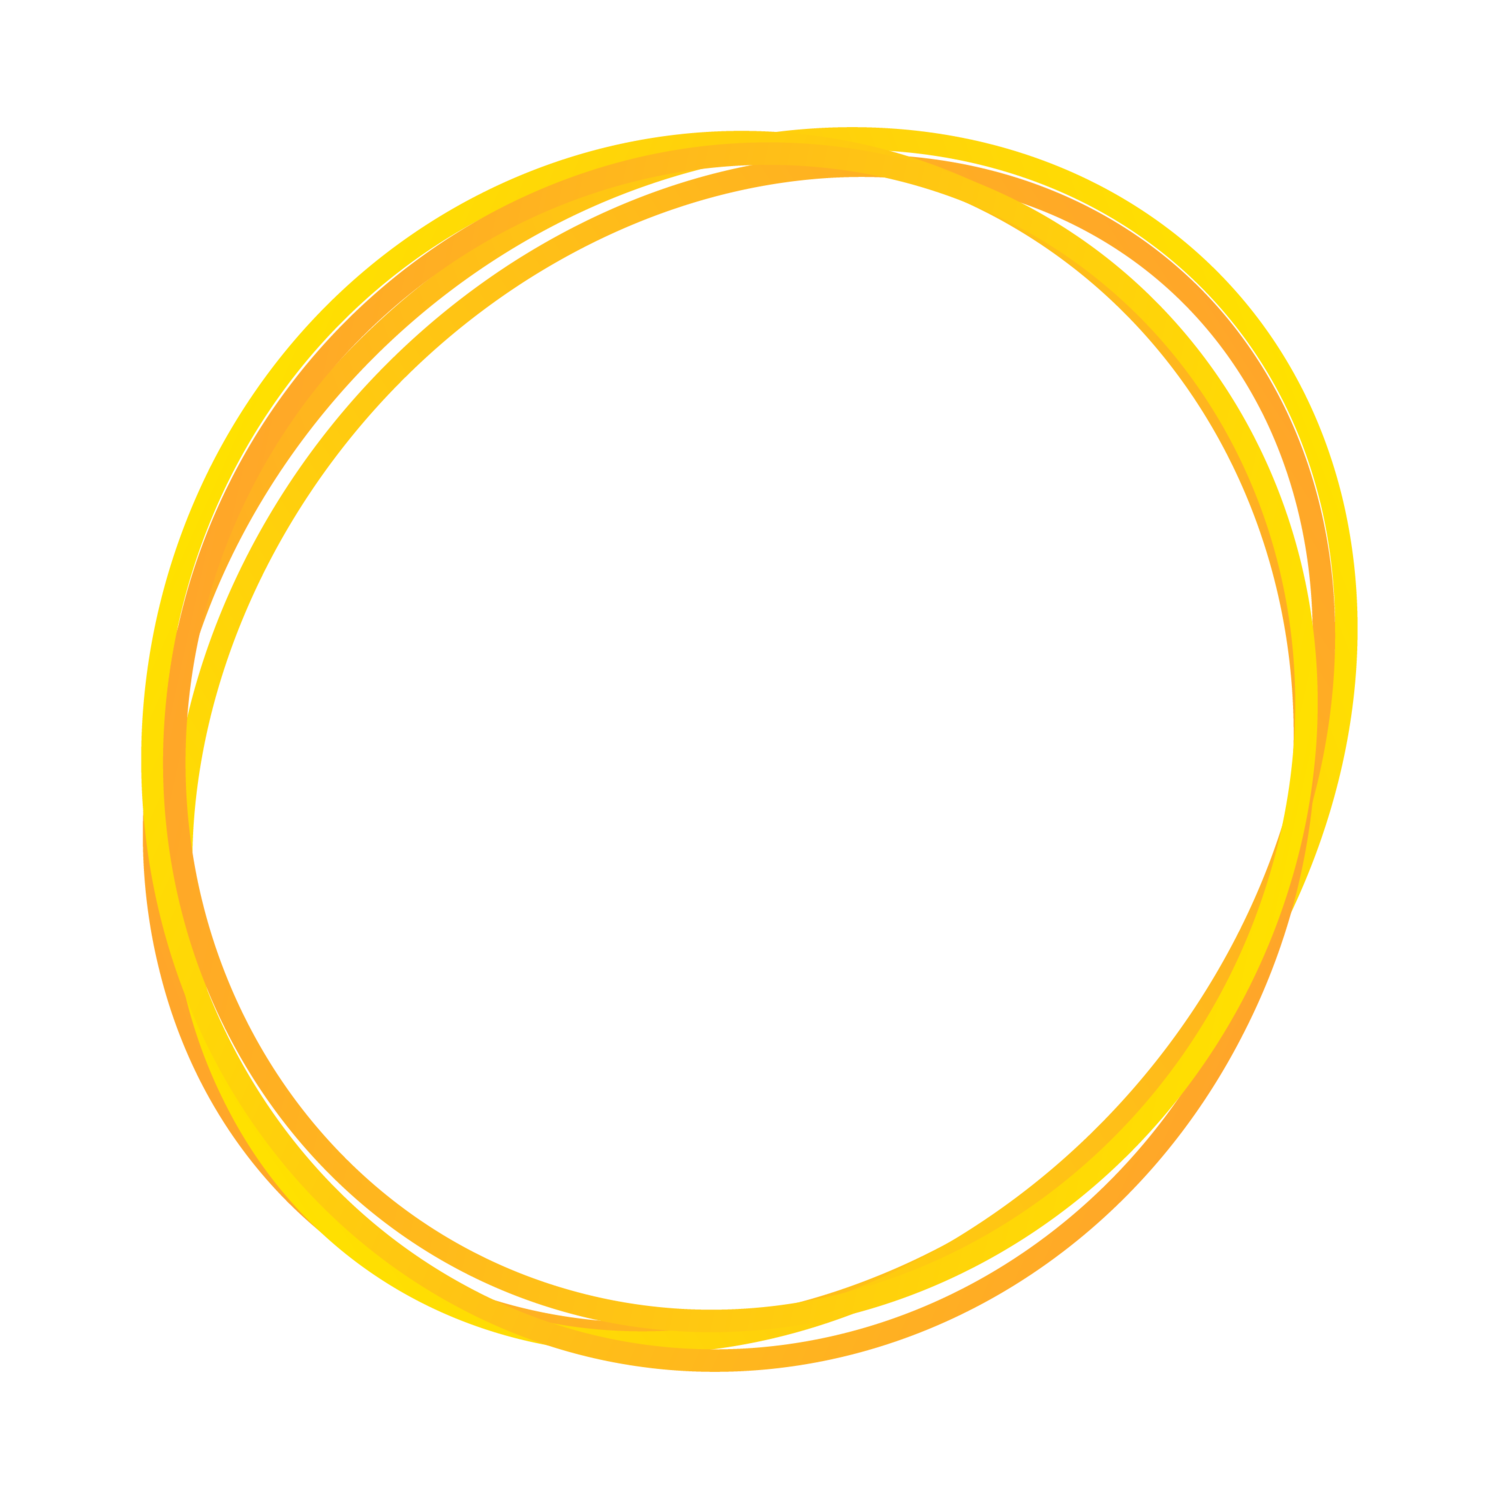 We can all be amazing